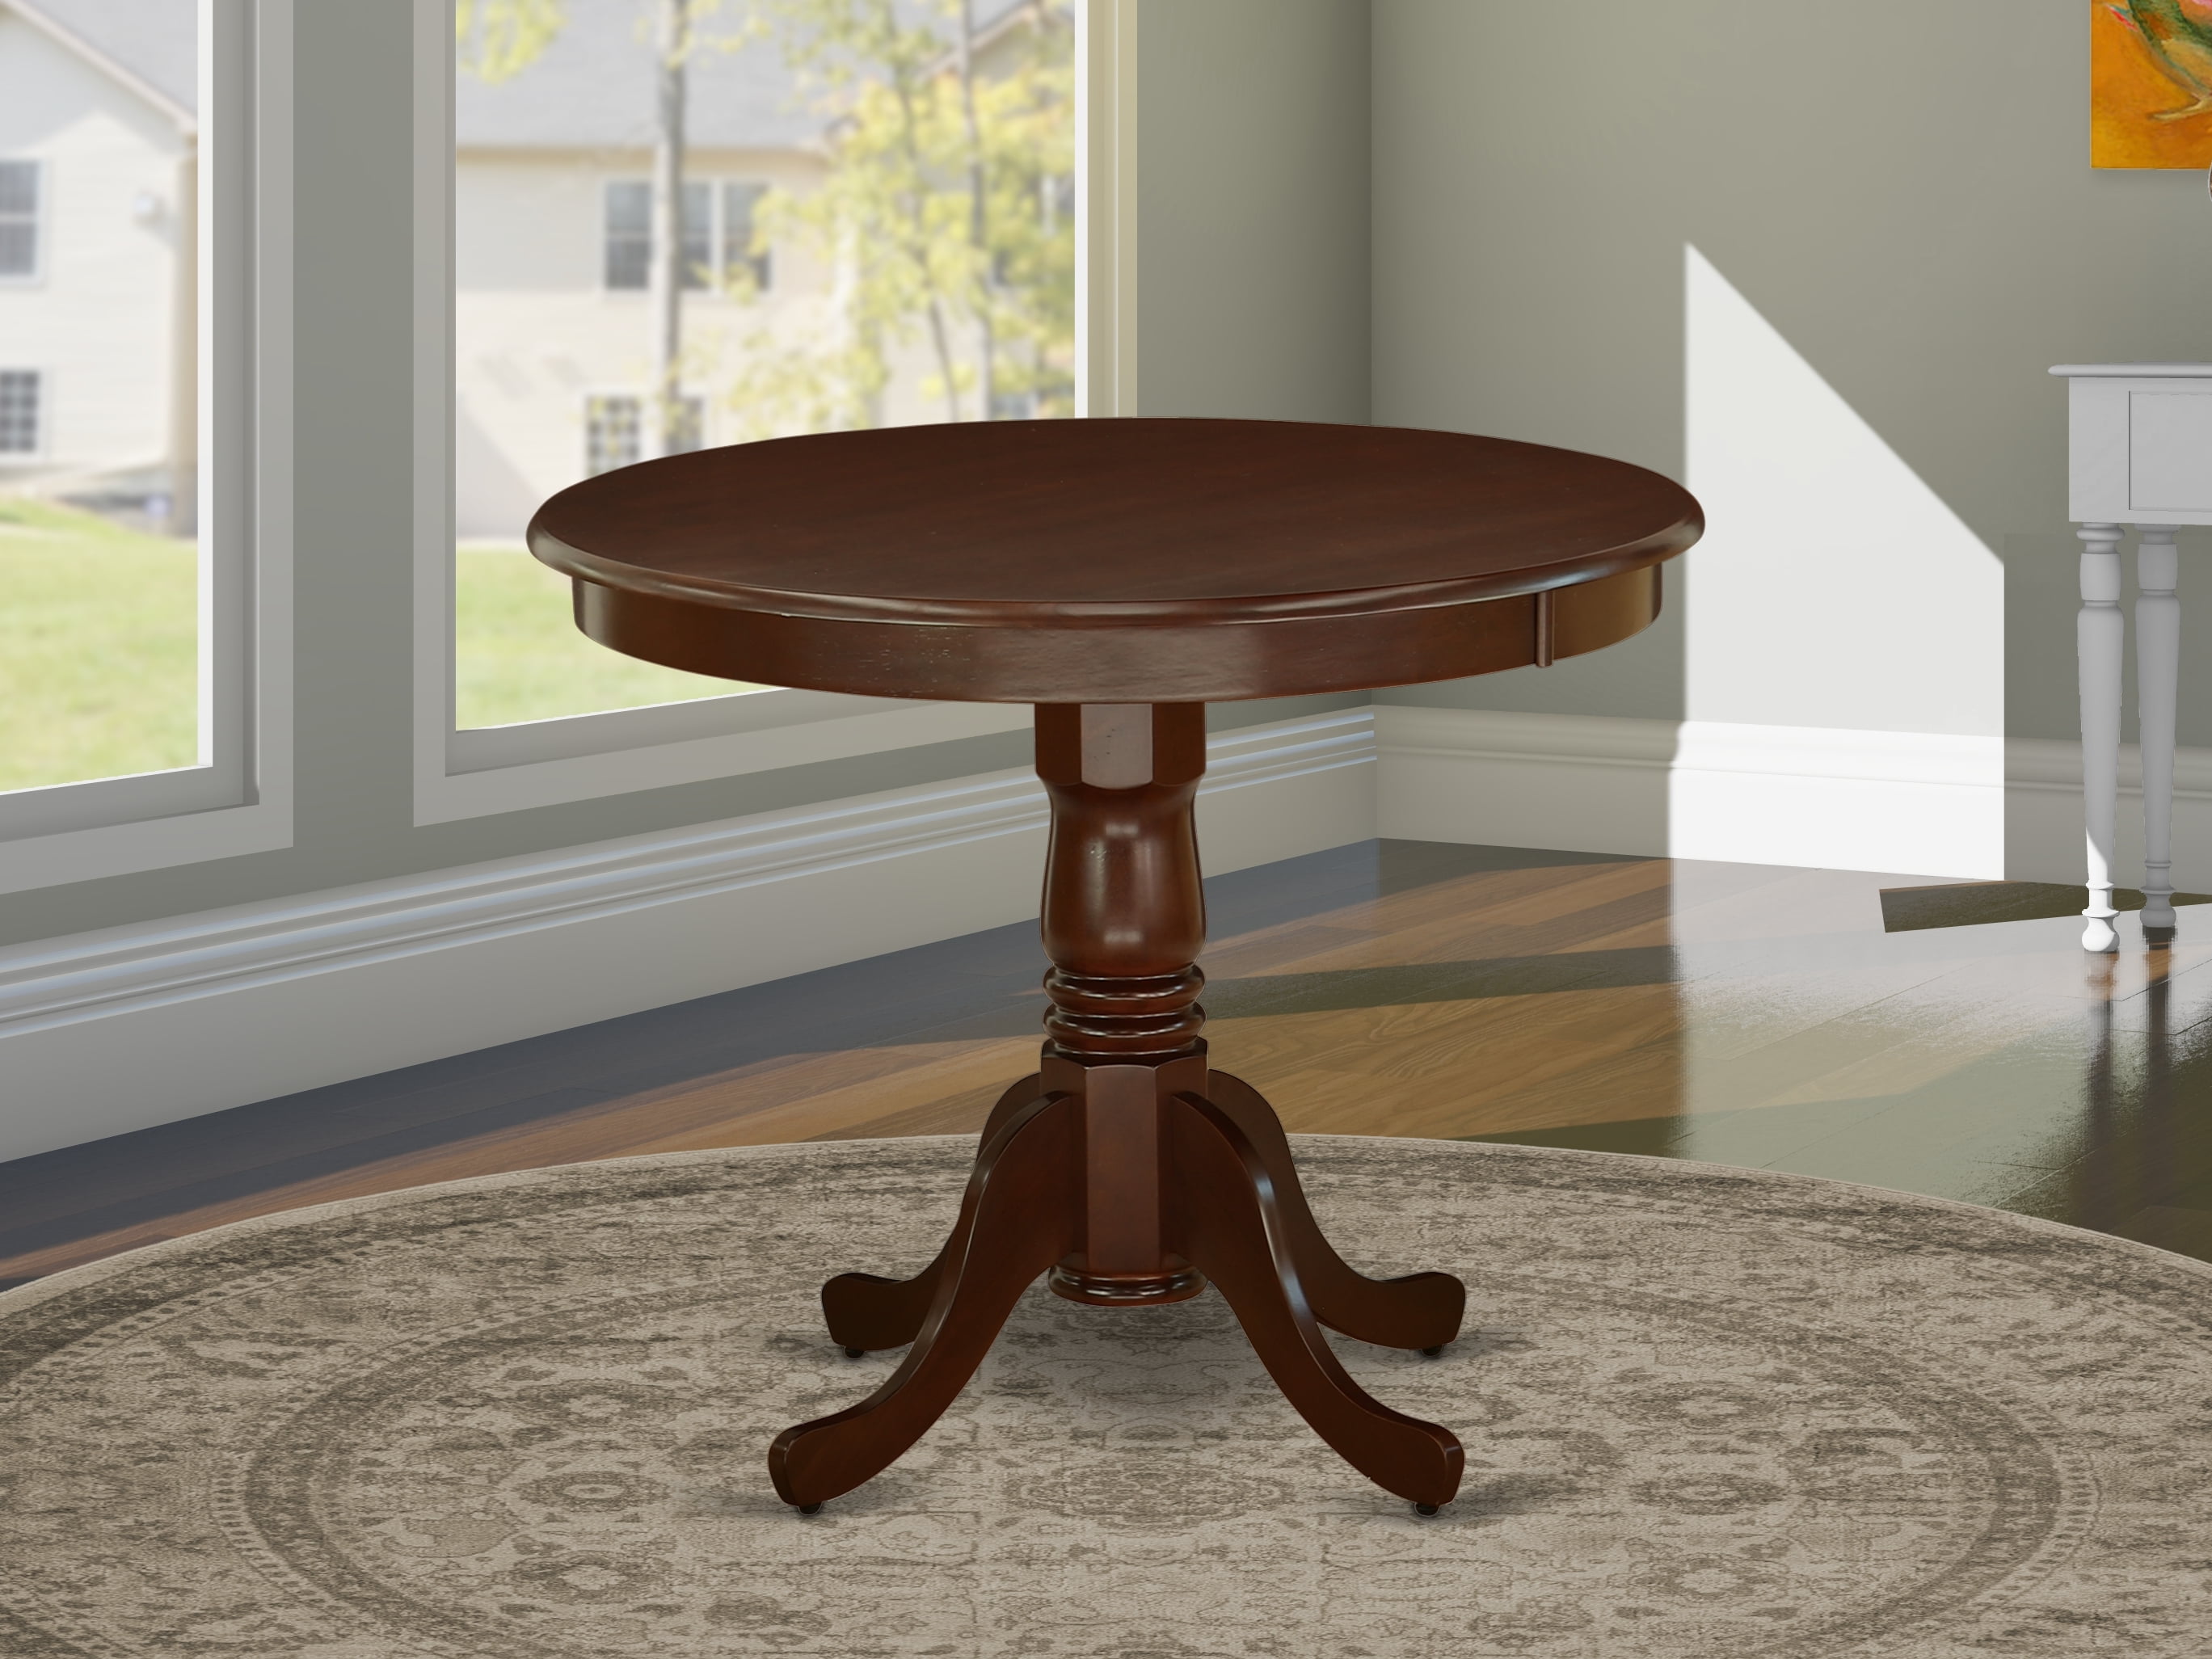 East West Furniture Ant Mah Tp Antique, 36 Round Kitchen Table With Leaf